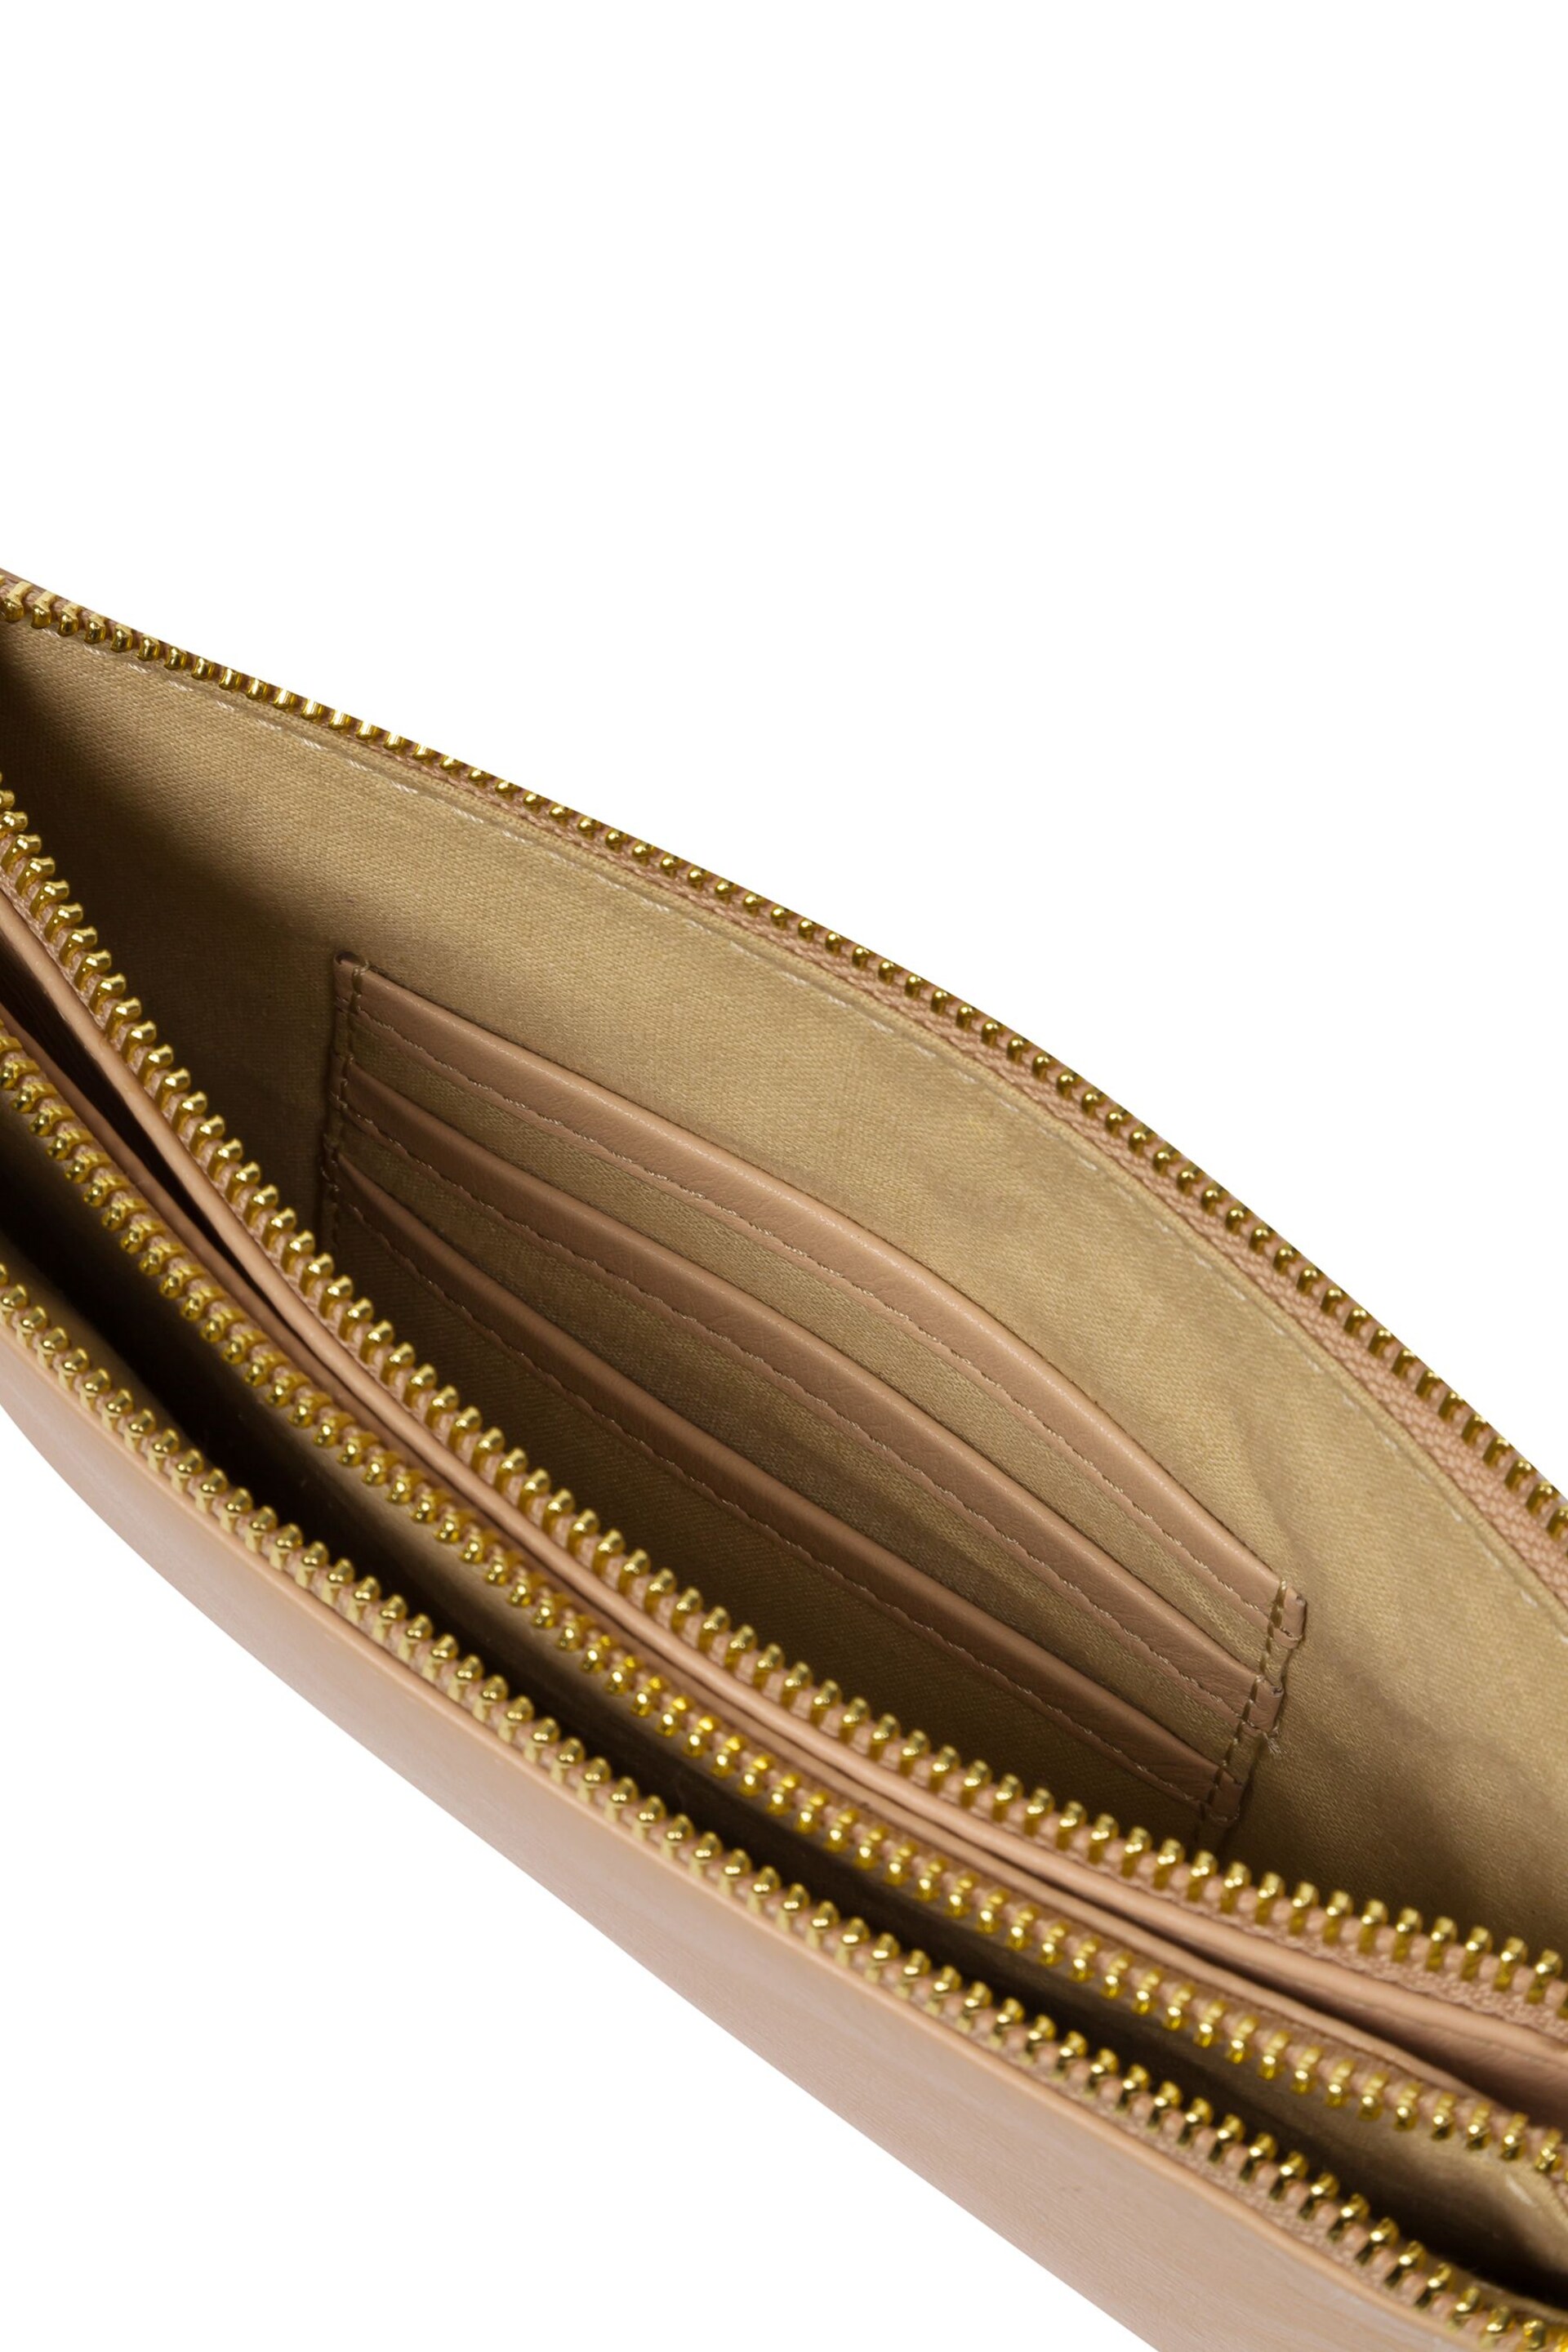 Pure Luxuries London Addison Nappa Leather Clutch Bag - Image 7 of 7